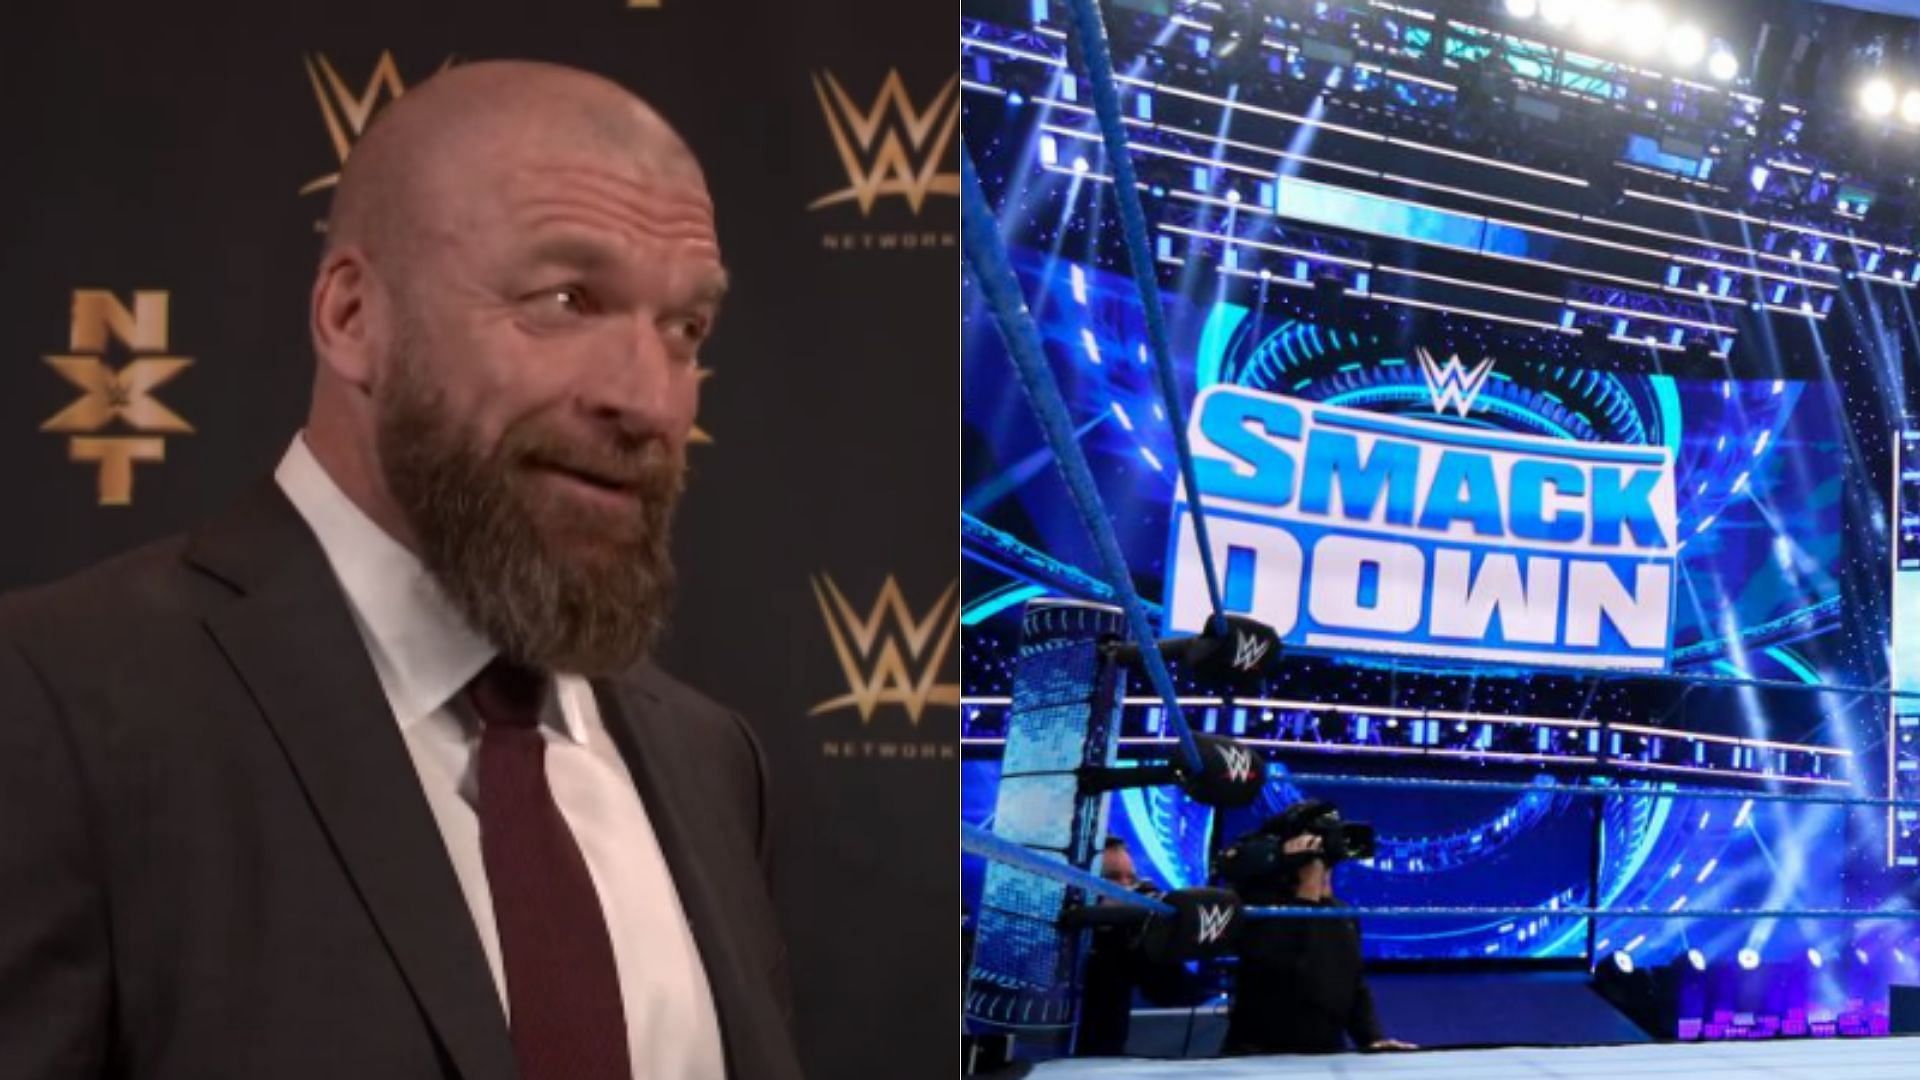 NXT founder and WWE executive Triple H